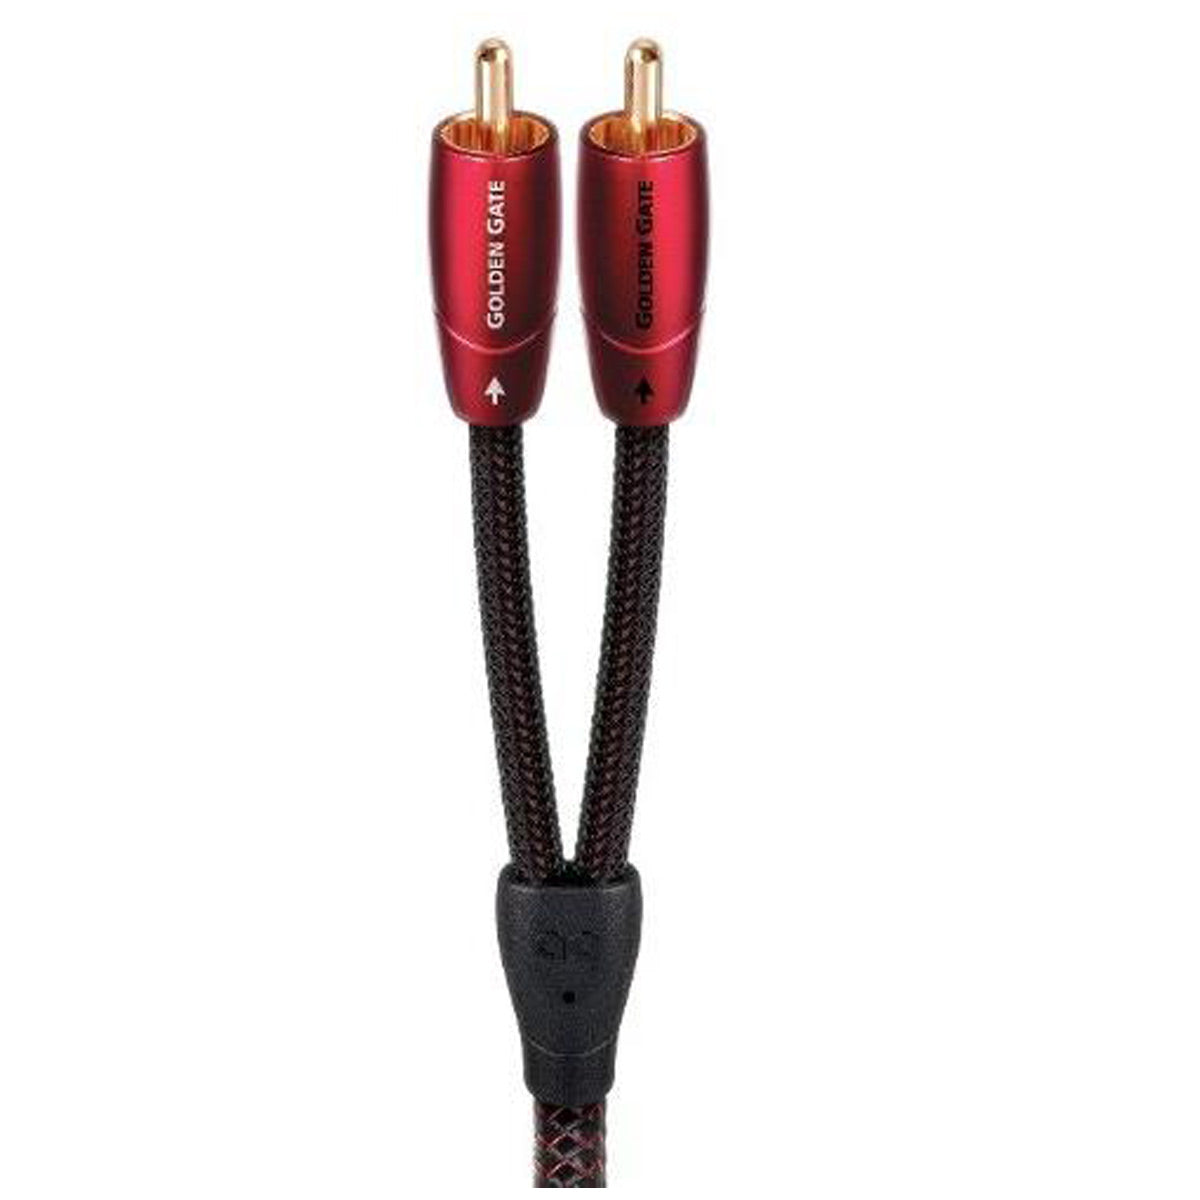 AudioQuest Golden Gate RCA Male to RCA Male Cable - 16.4 ft. (5m)